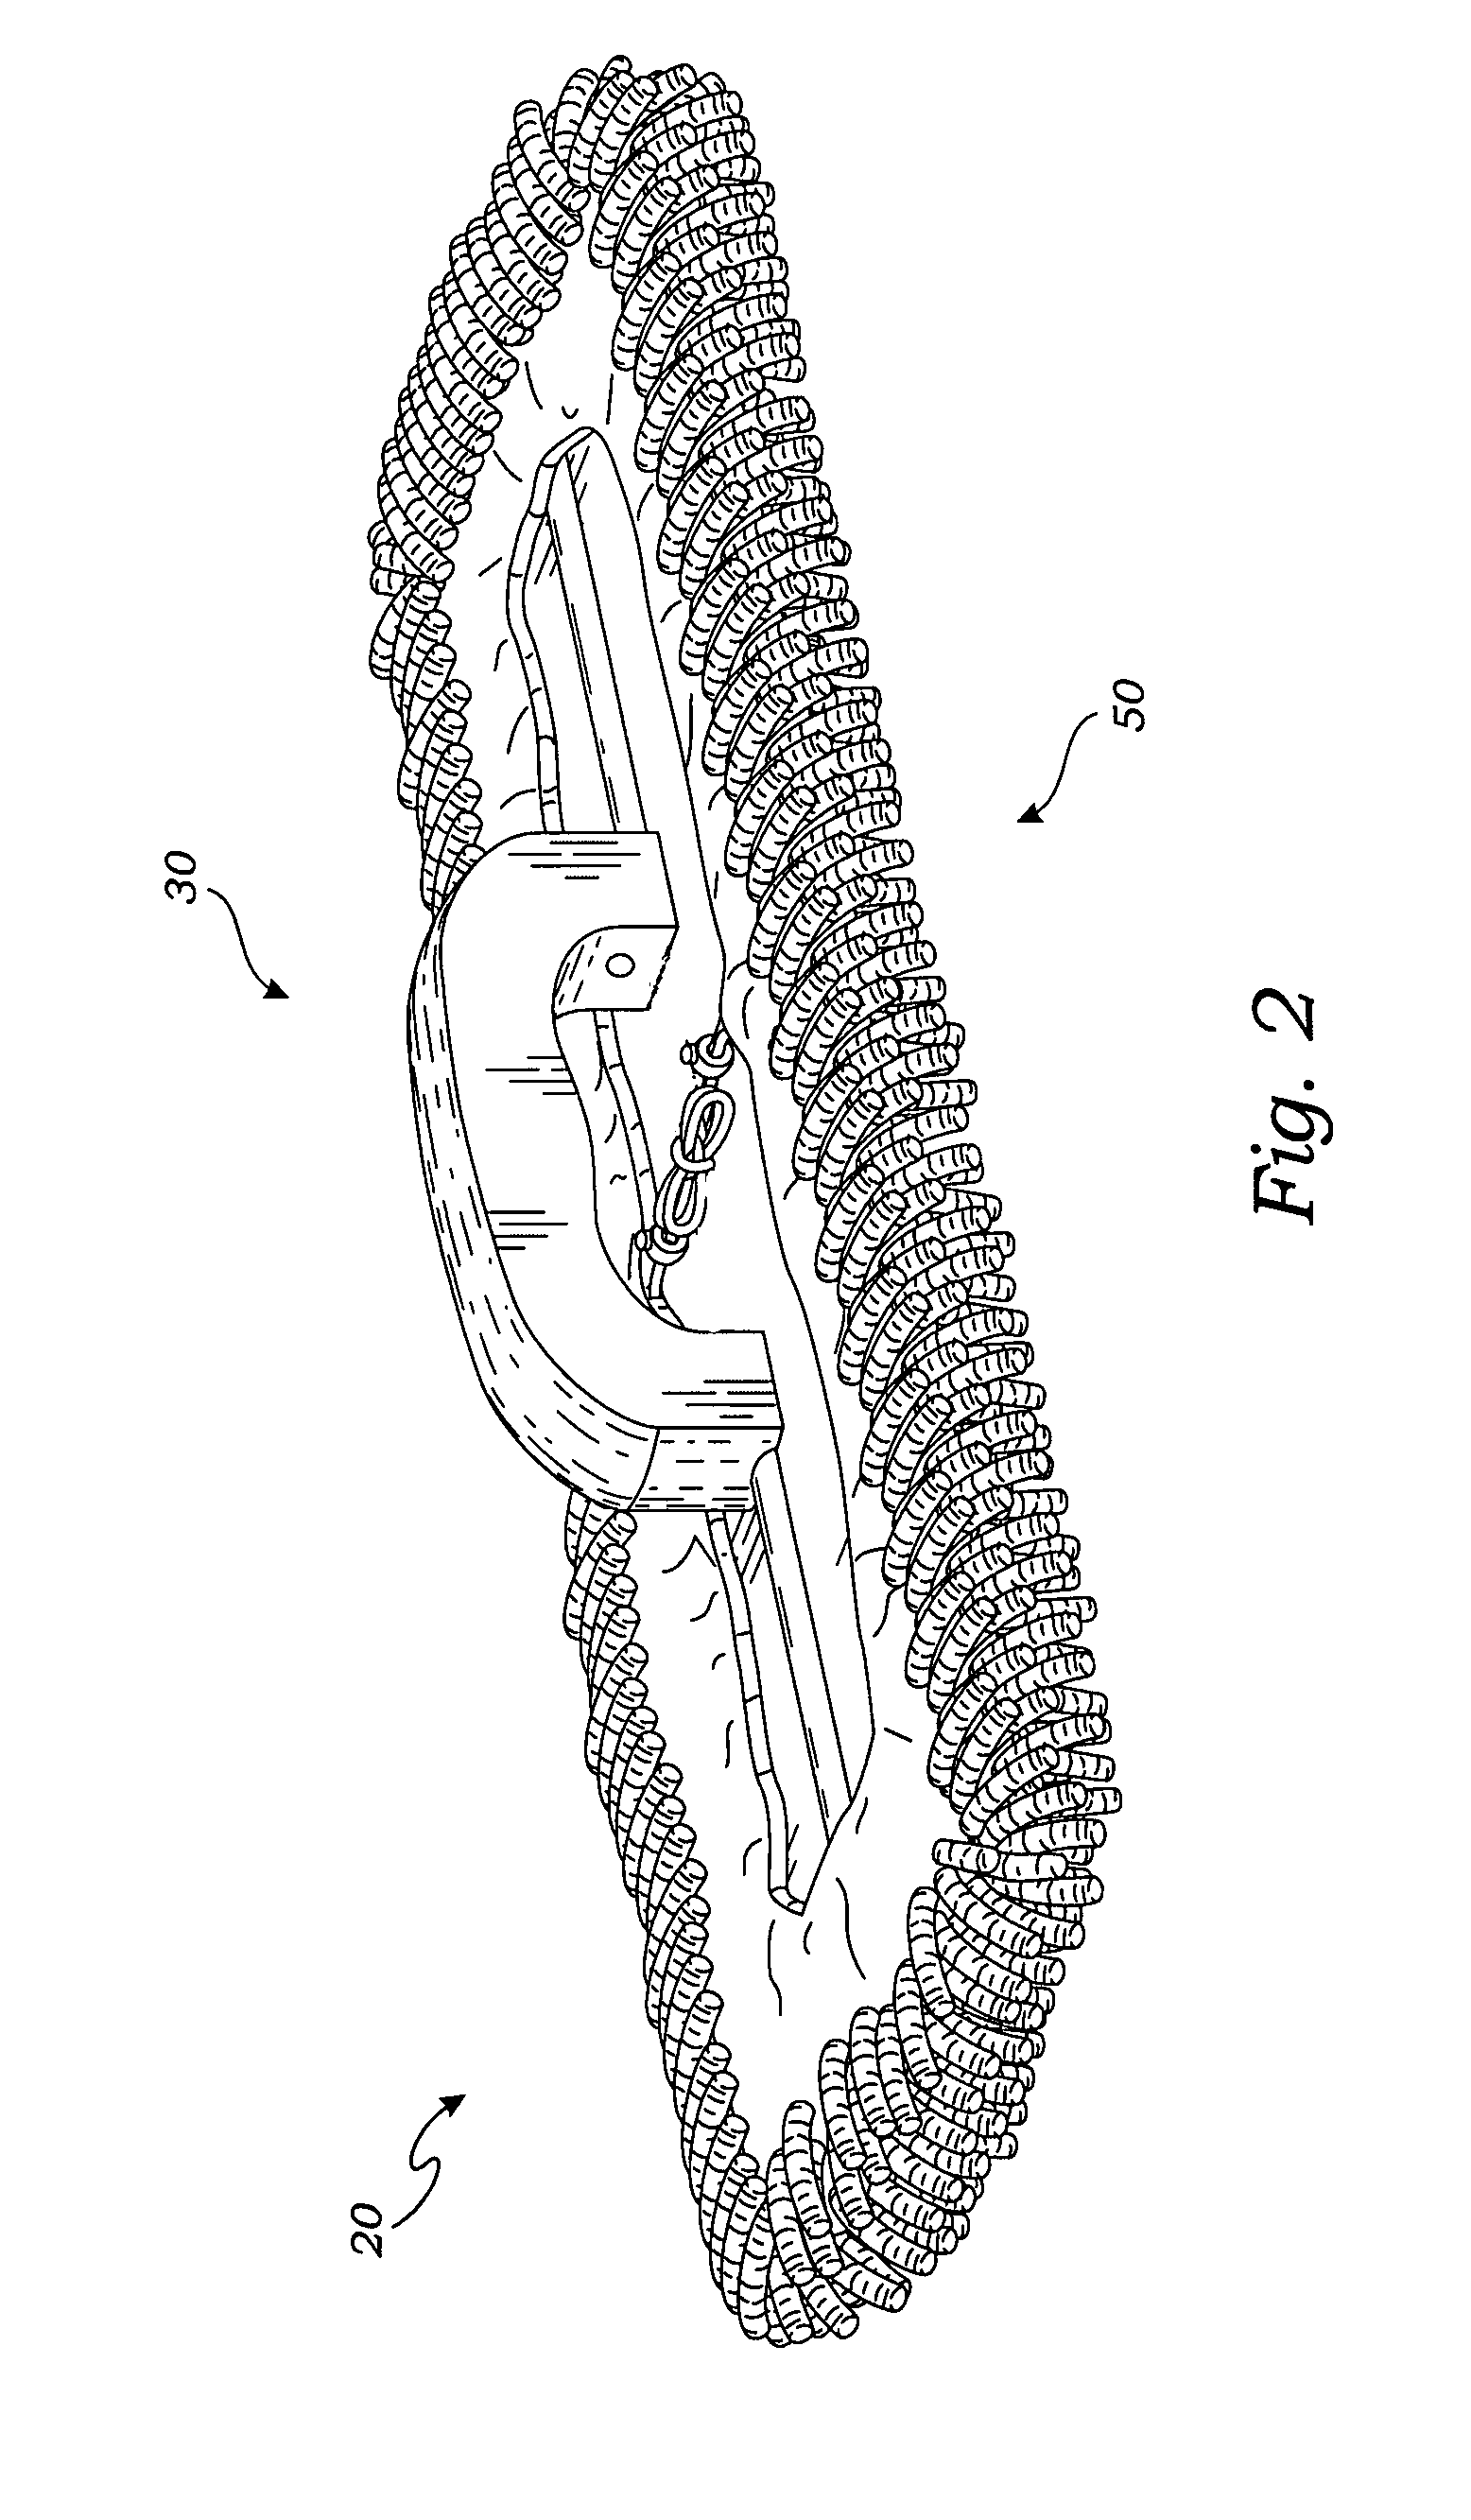 Multi-purpose mop system and method of use